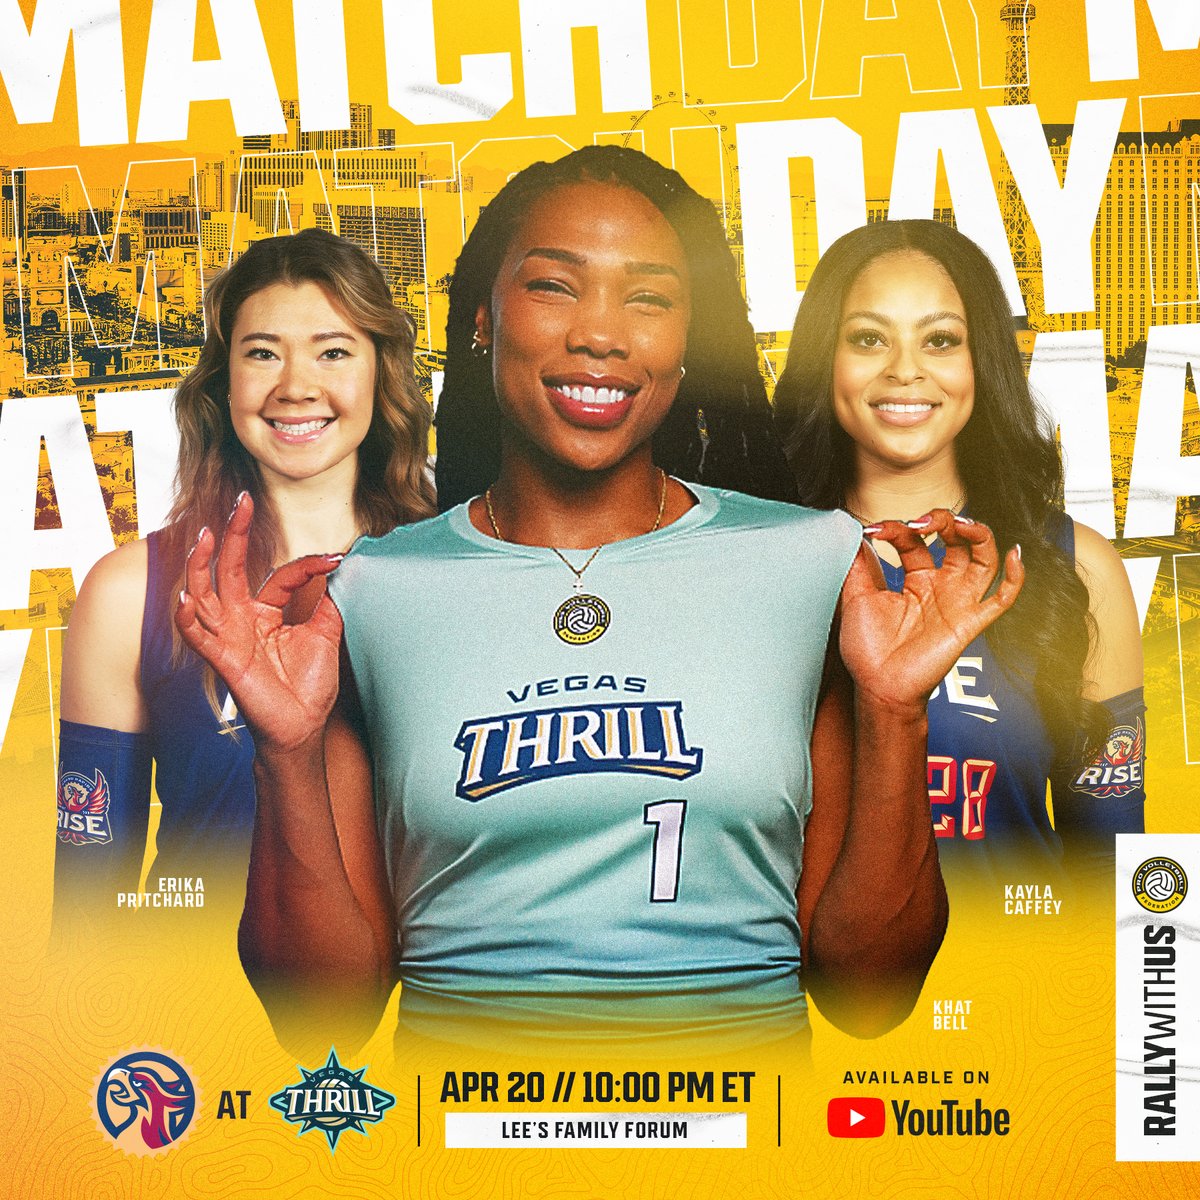 2 matches coming at you today on @YouTube! 🏐: @sandiegomojo vs. @OmahaSupernovas at 7 p.m. ET 🏐: @GR_Rise vs. @vegasthrillvb at 10 p.m. ET #RallyWithUs # RealProVolleyball